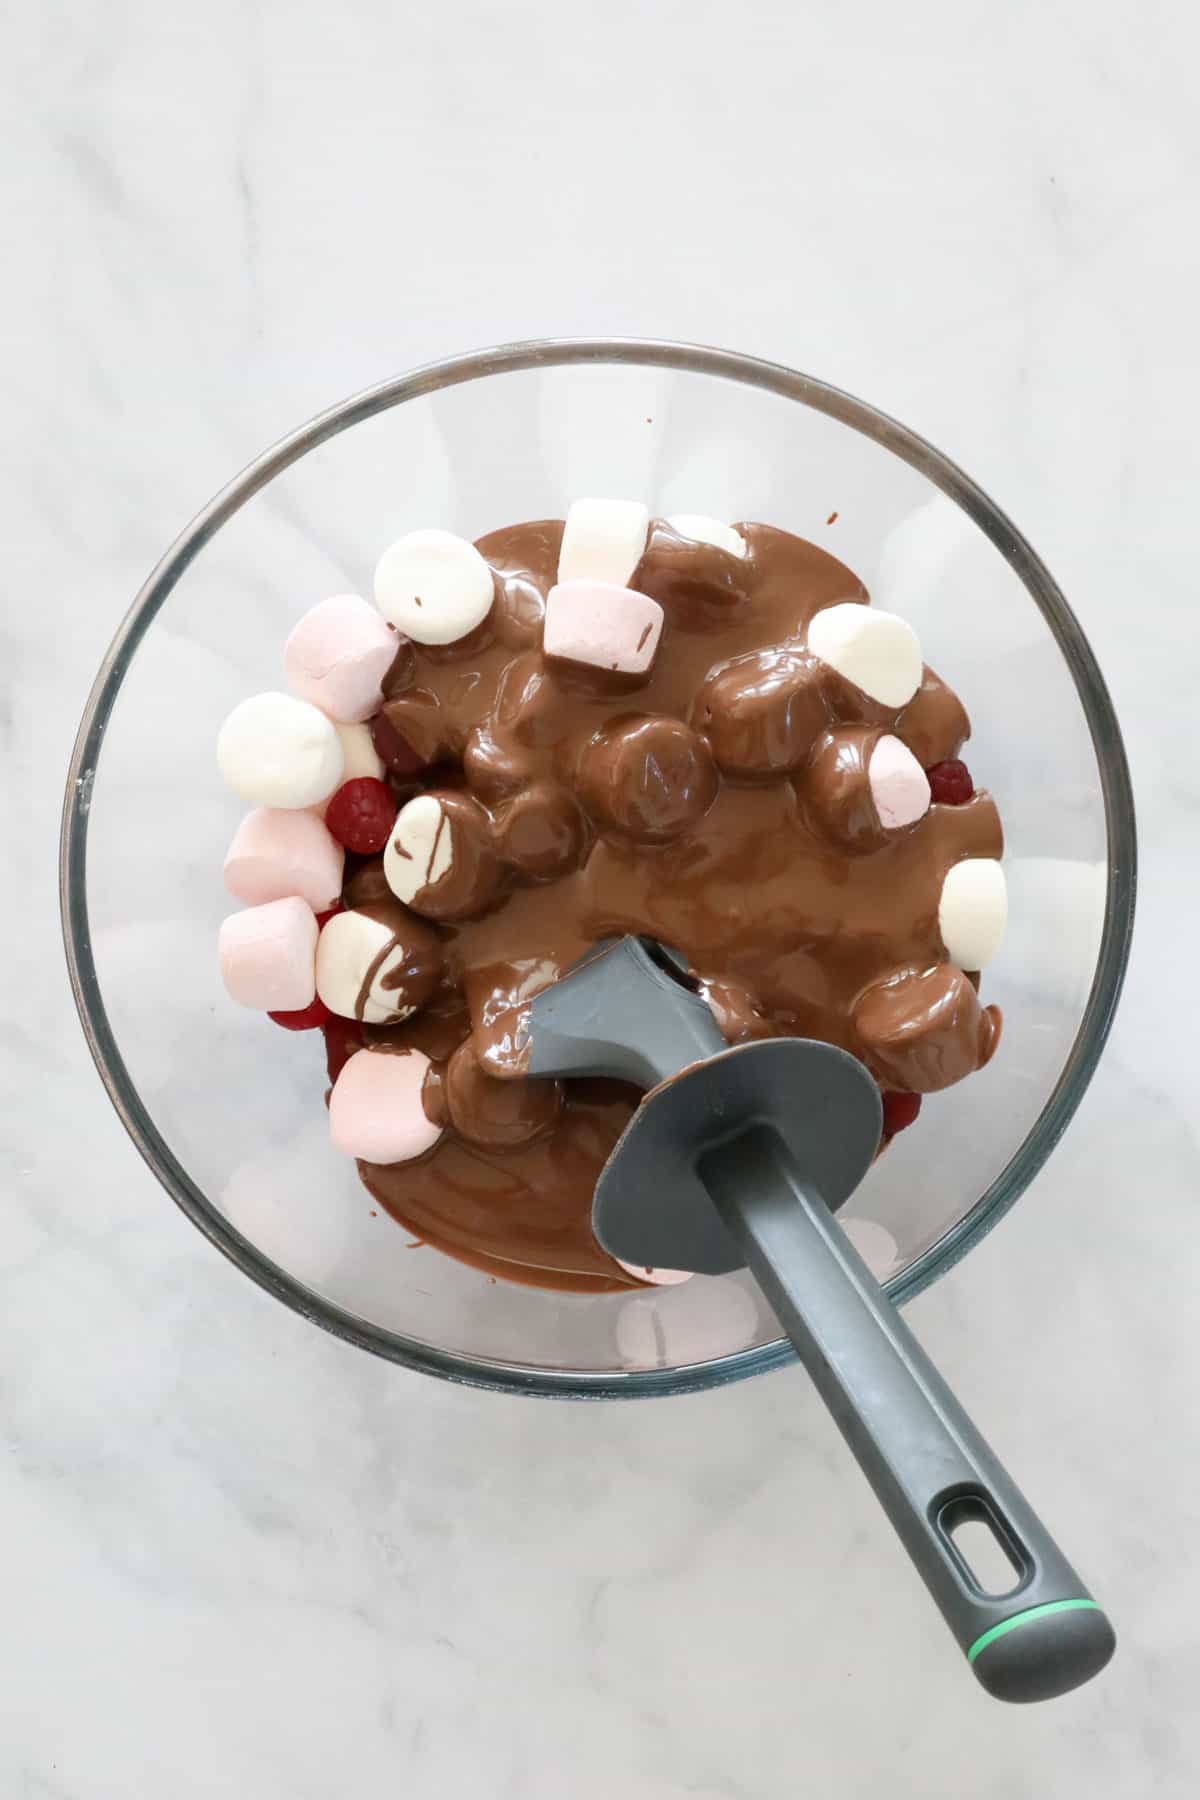 Melted chocolate in a bowl with marshmallows.